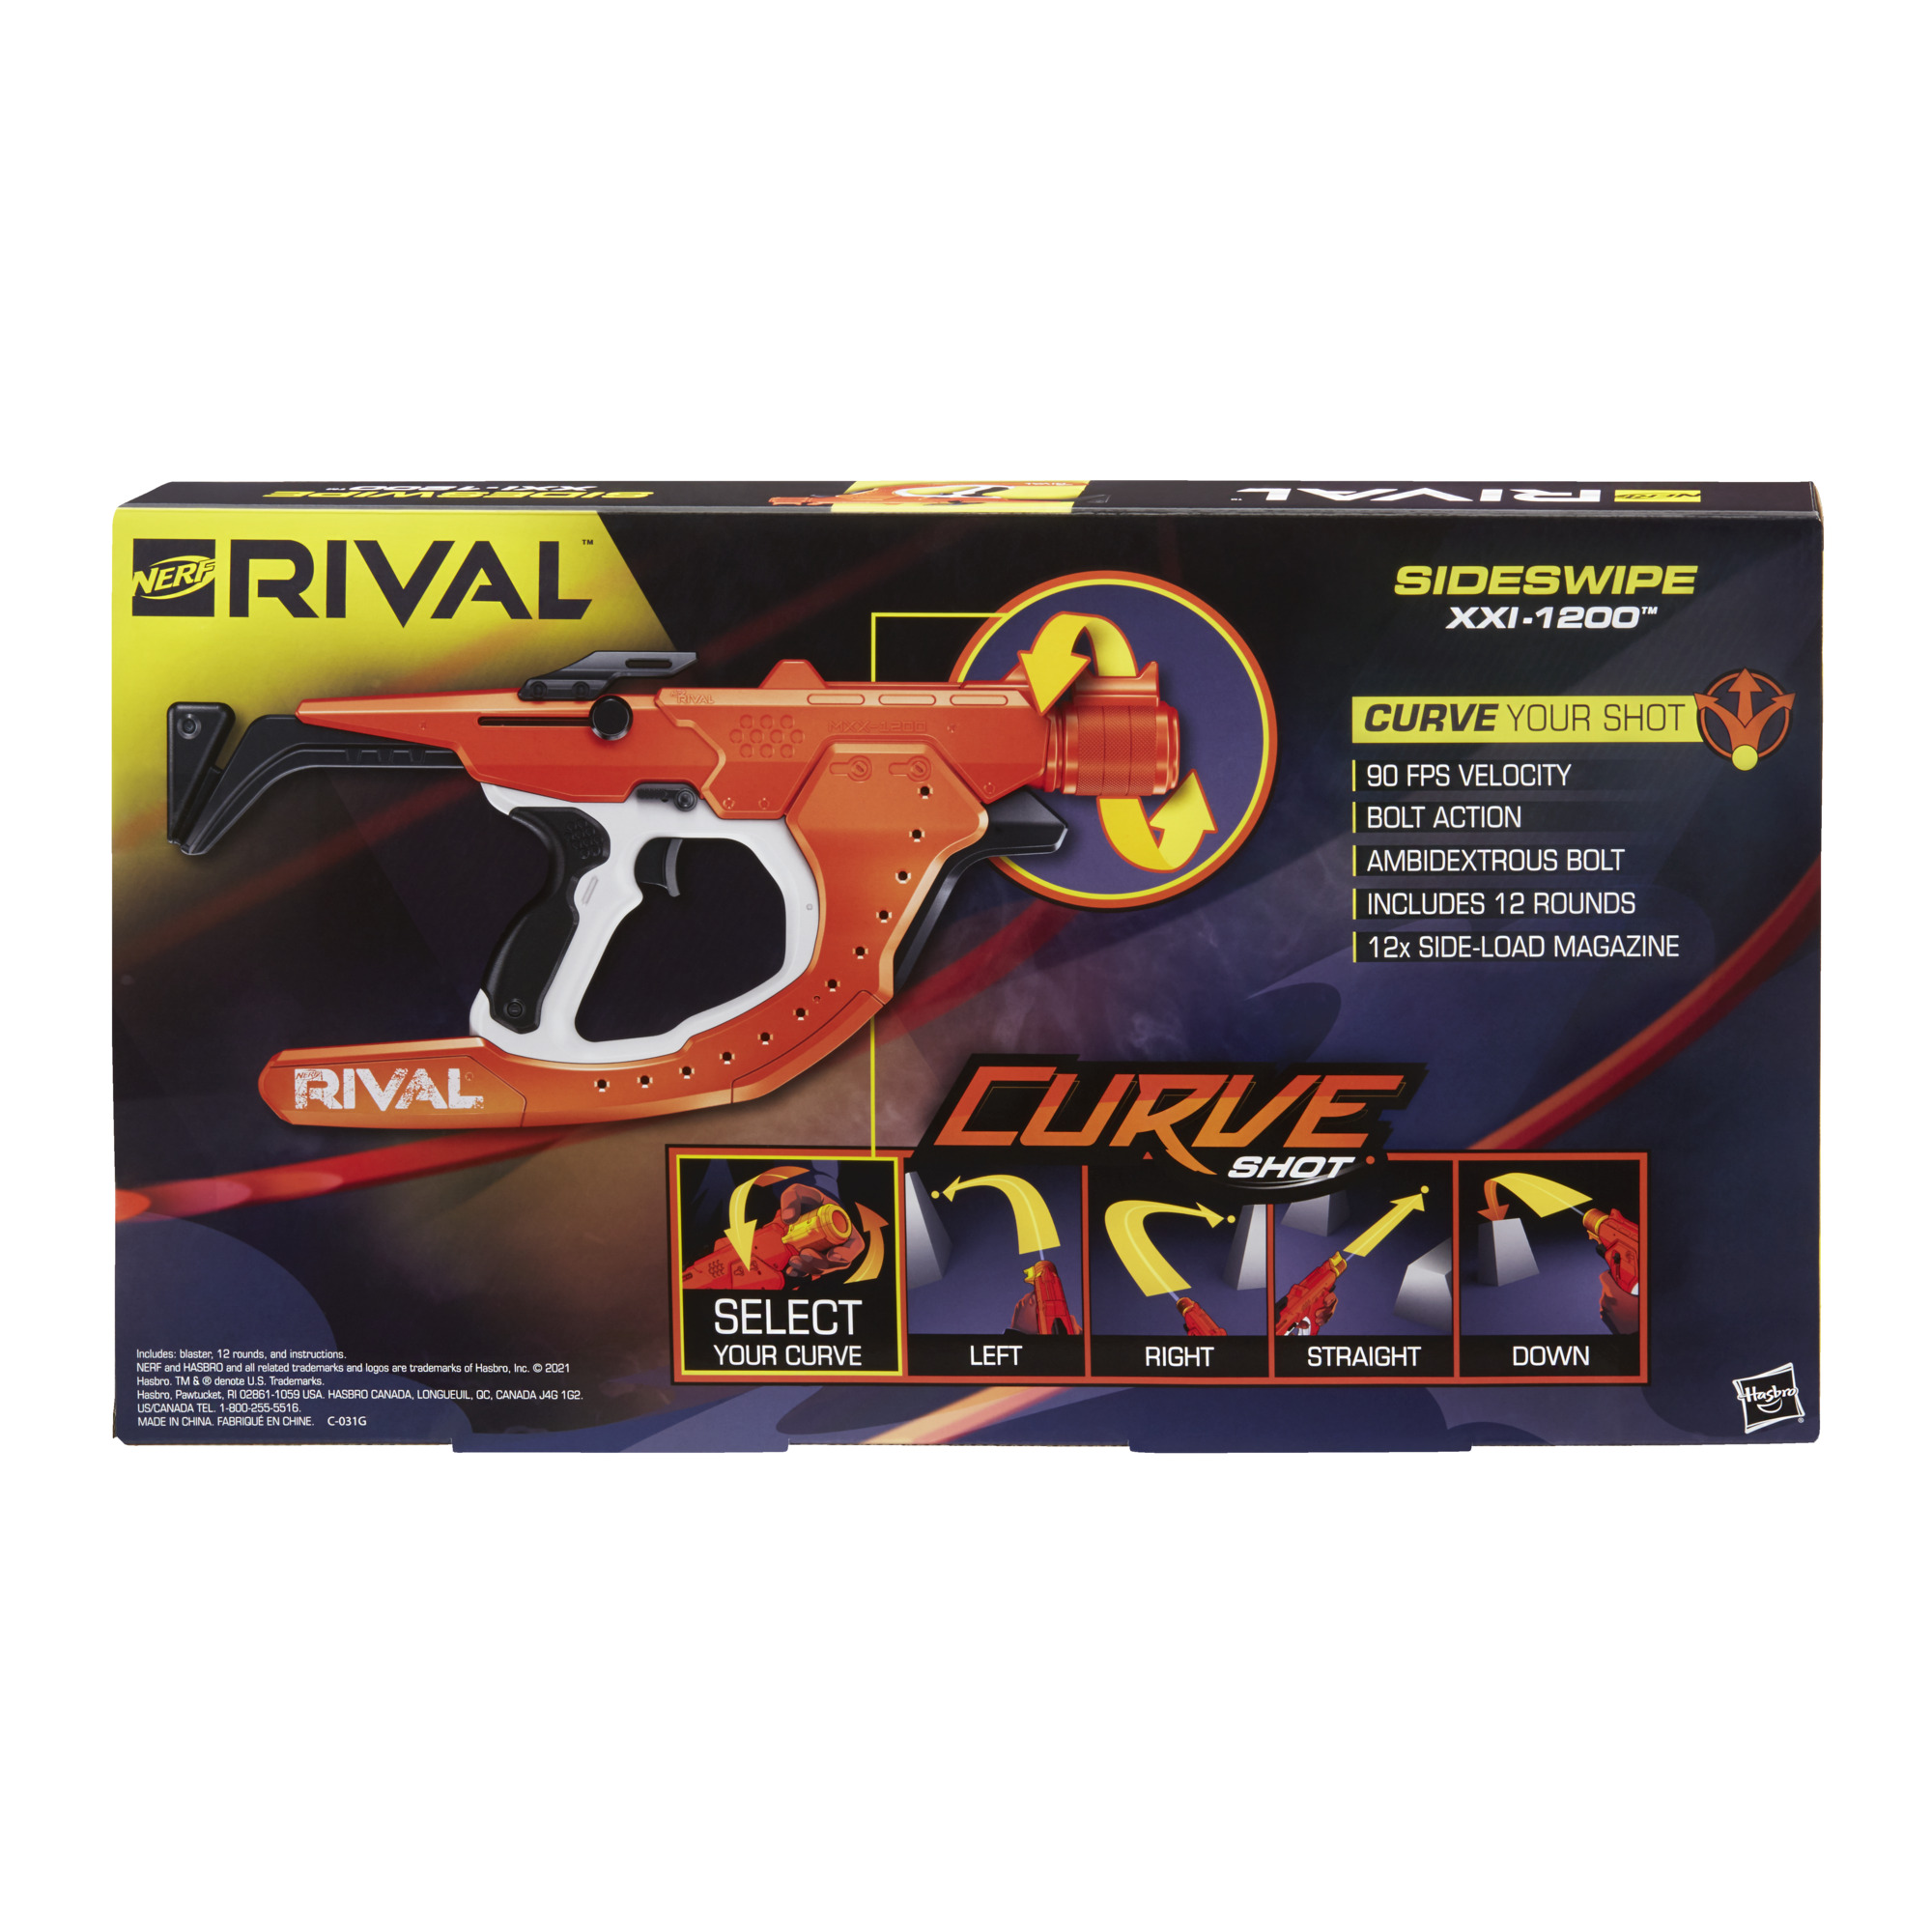 Nerf Rival Curve Shot  Sideswipe XXI-1200 Blaster FAST POST before 1pm bus day 